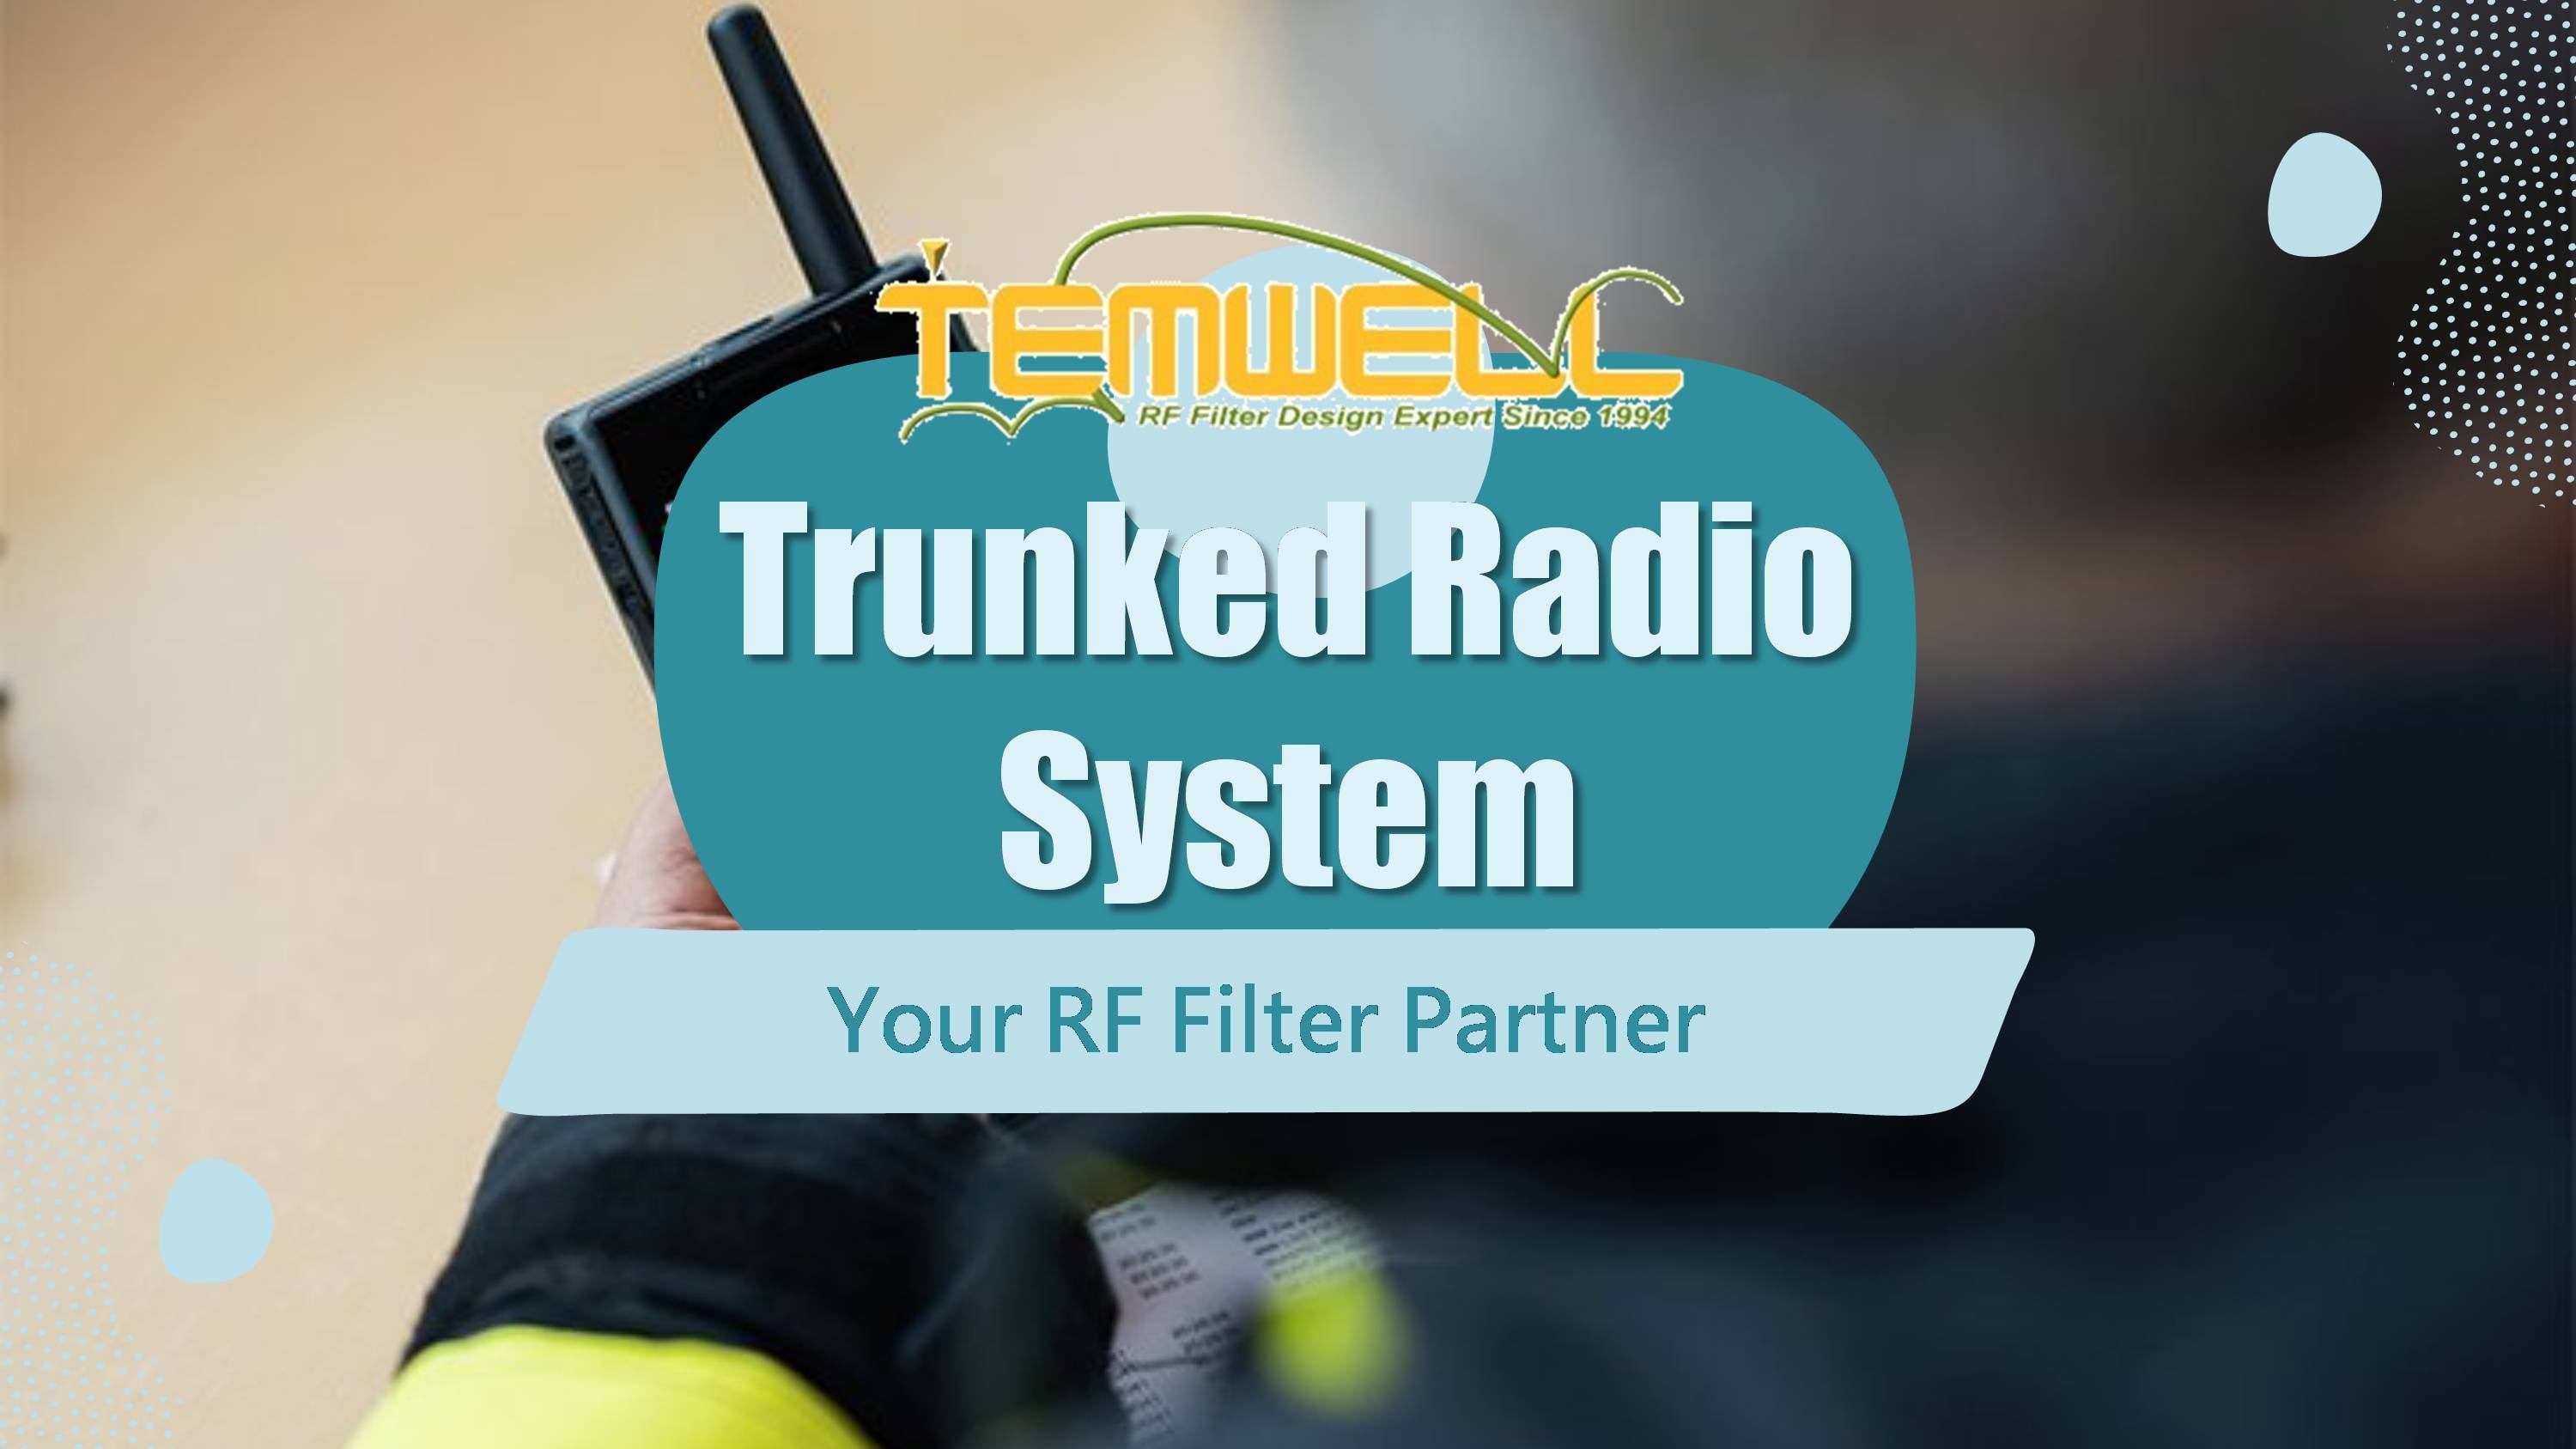 proimages/featured/trunking-radio-system/trunking-radio-system2.jpg